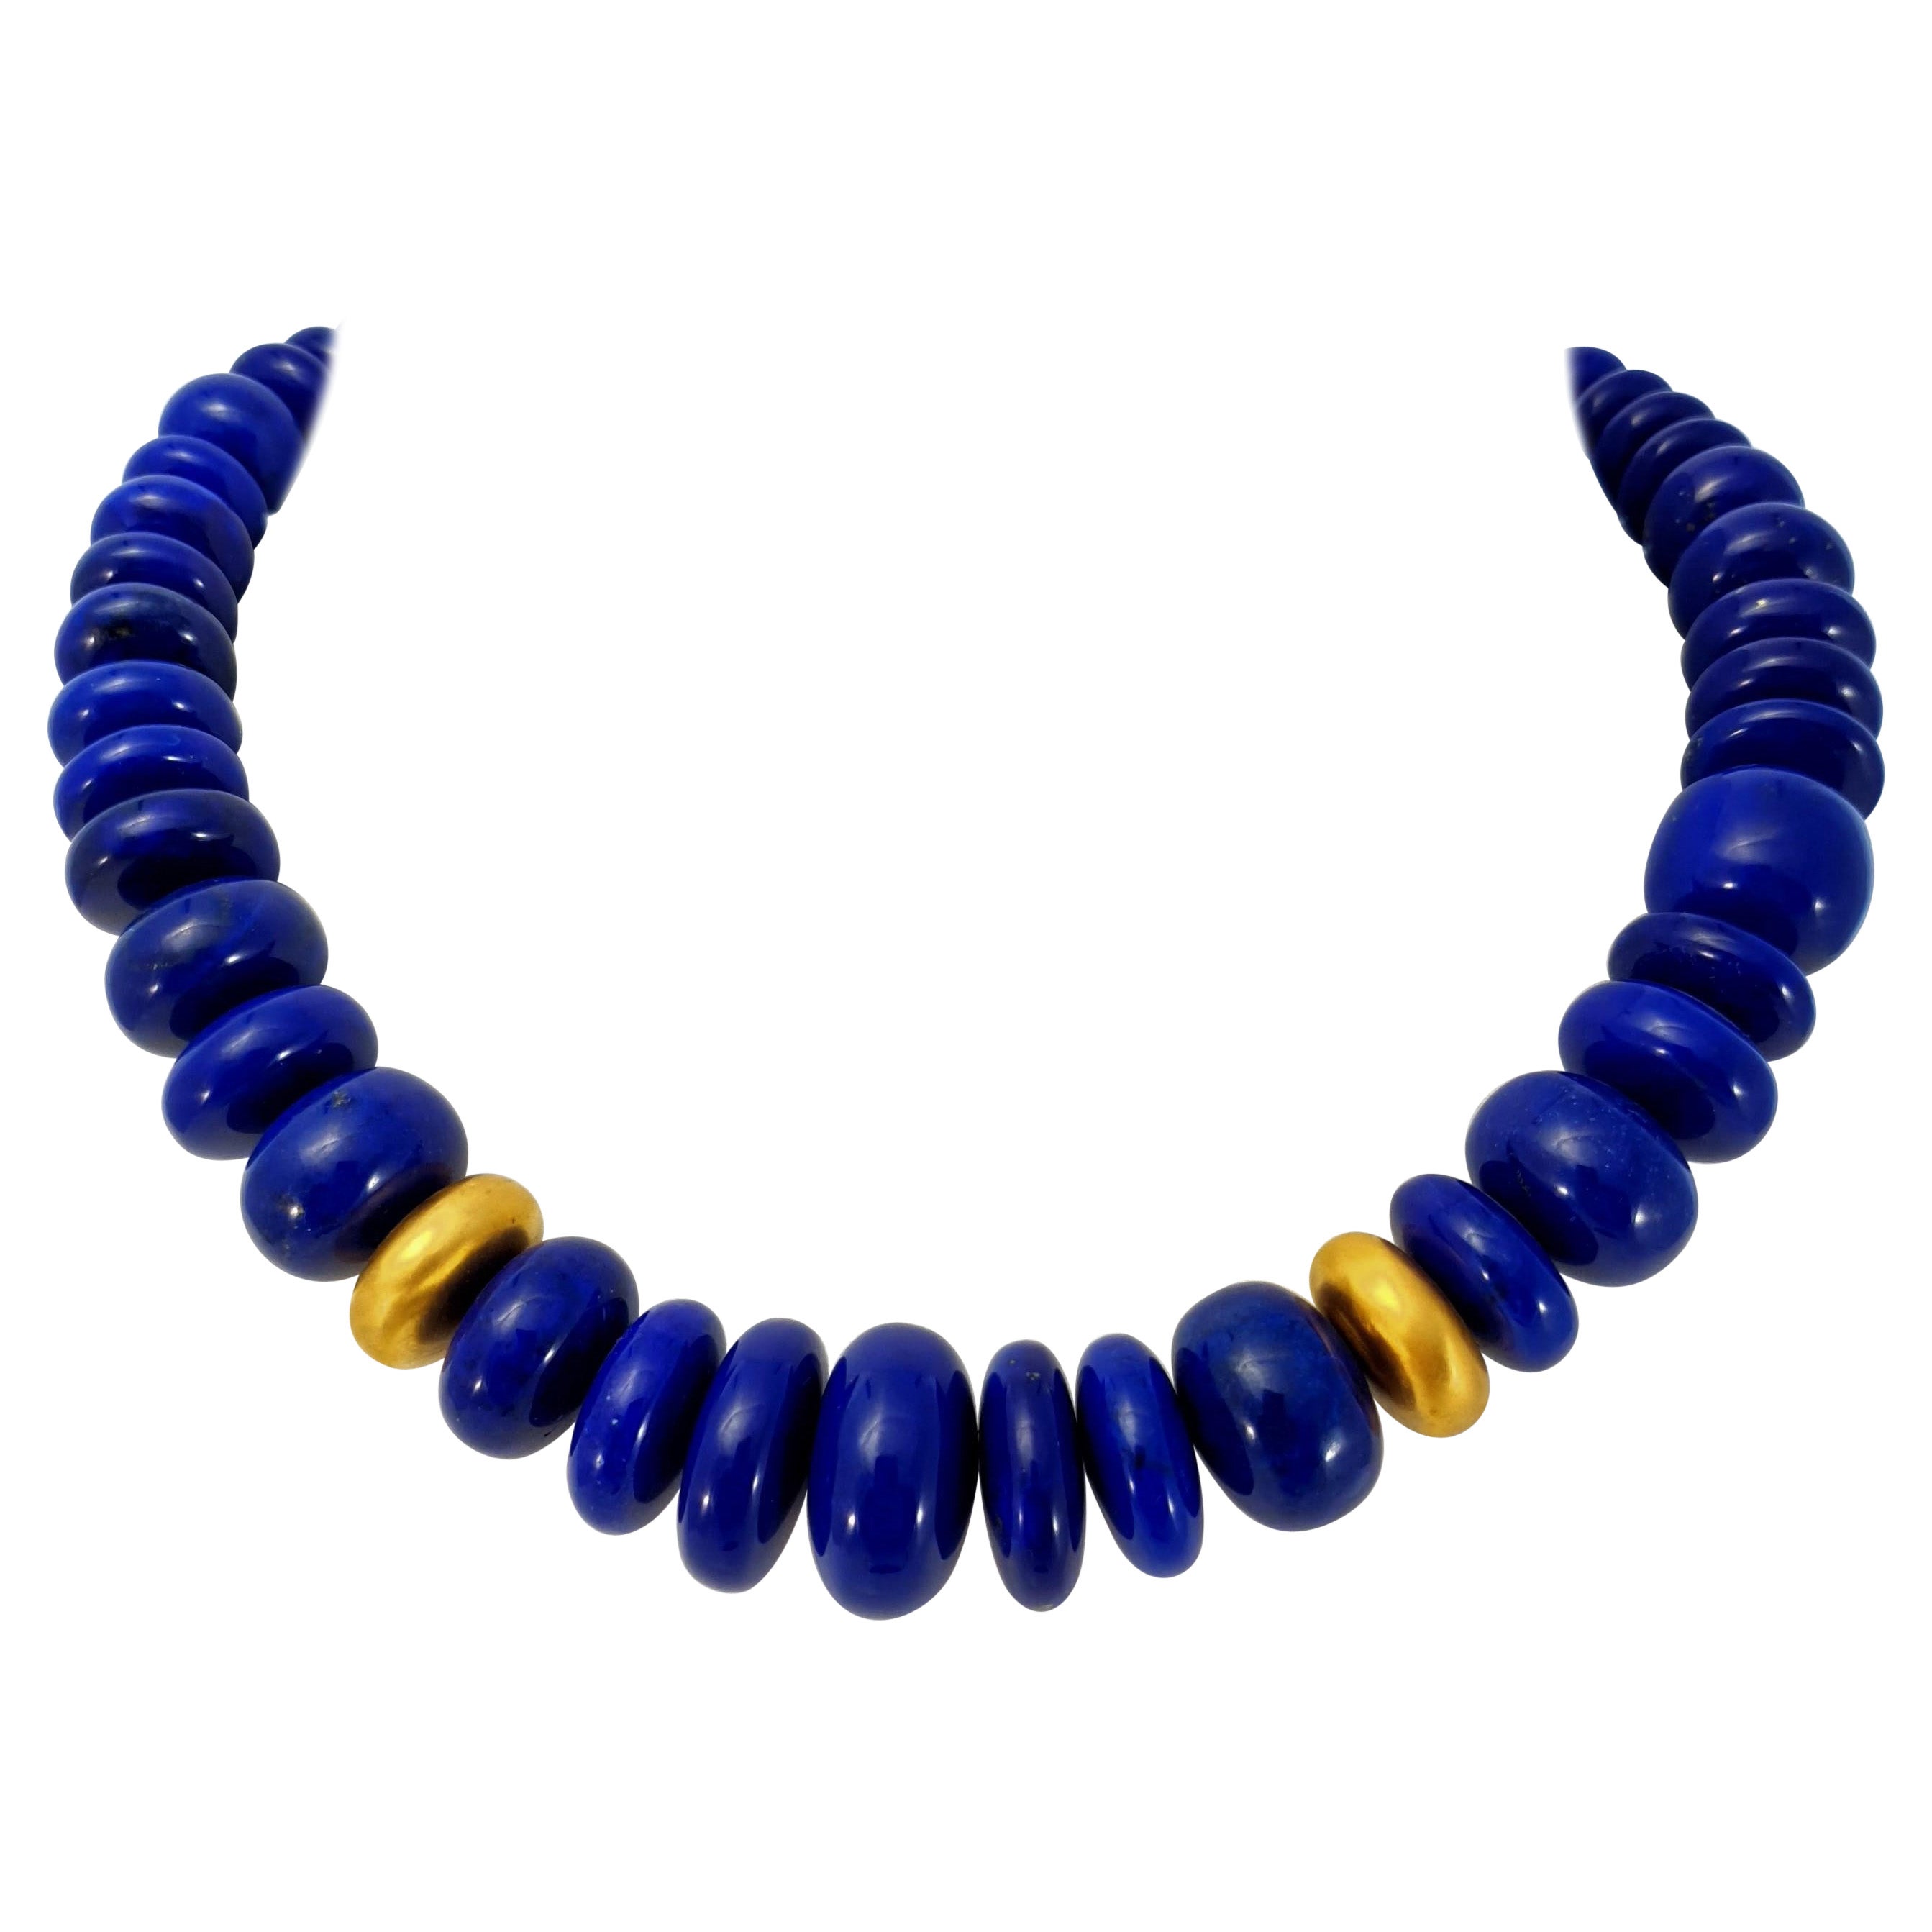 Royal Blue Lapis Lazuli Rondel Beaded Necklace with 18 Carat Mat Yellow Gold For Sale